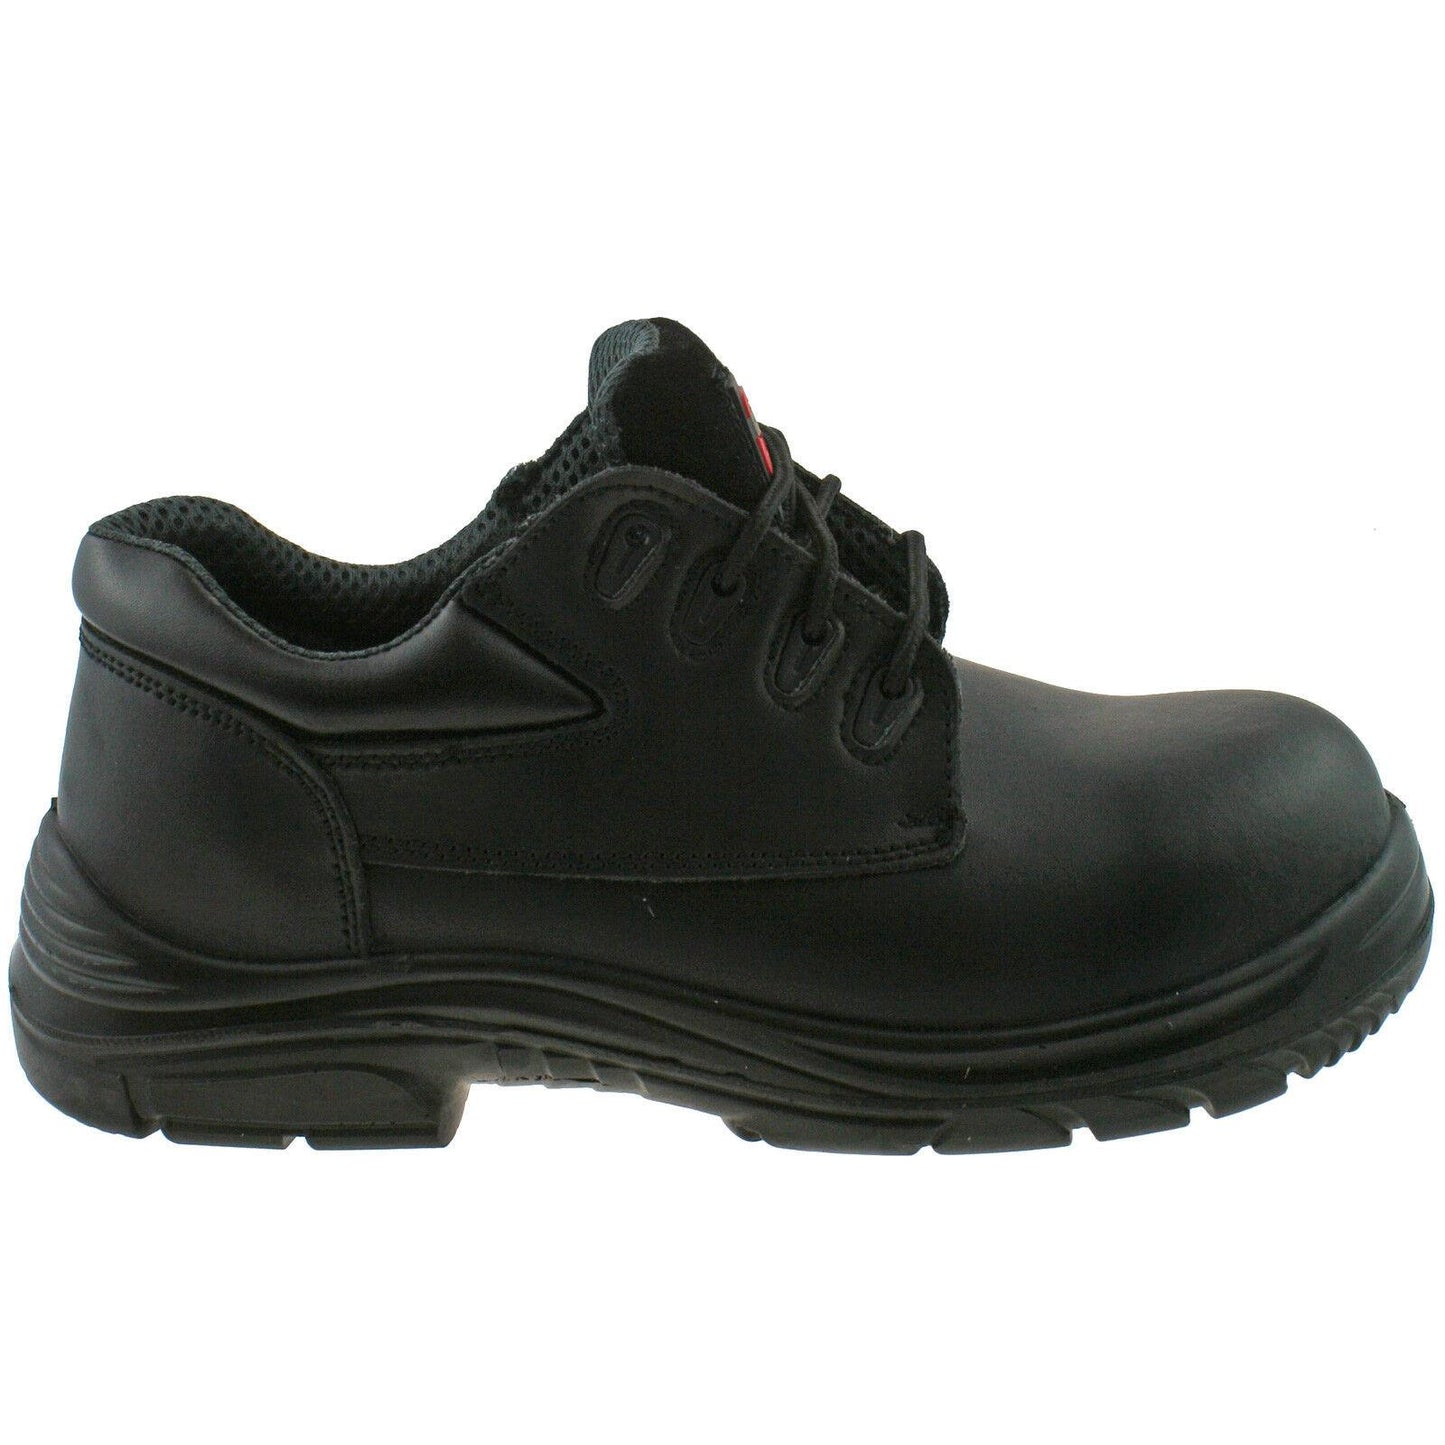 Grafters Black Safety Shoe M9504A